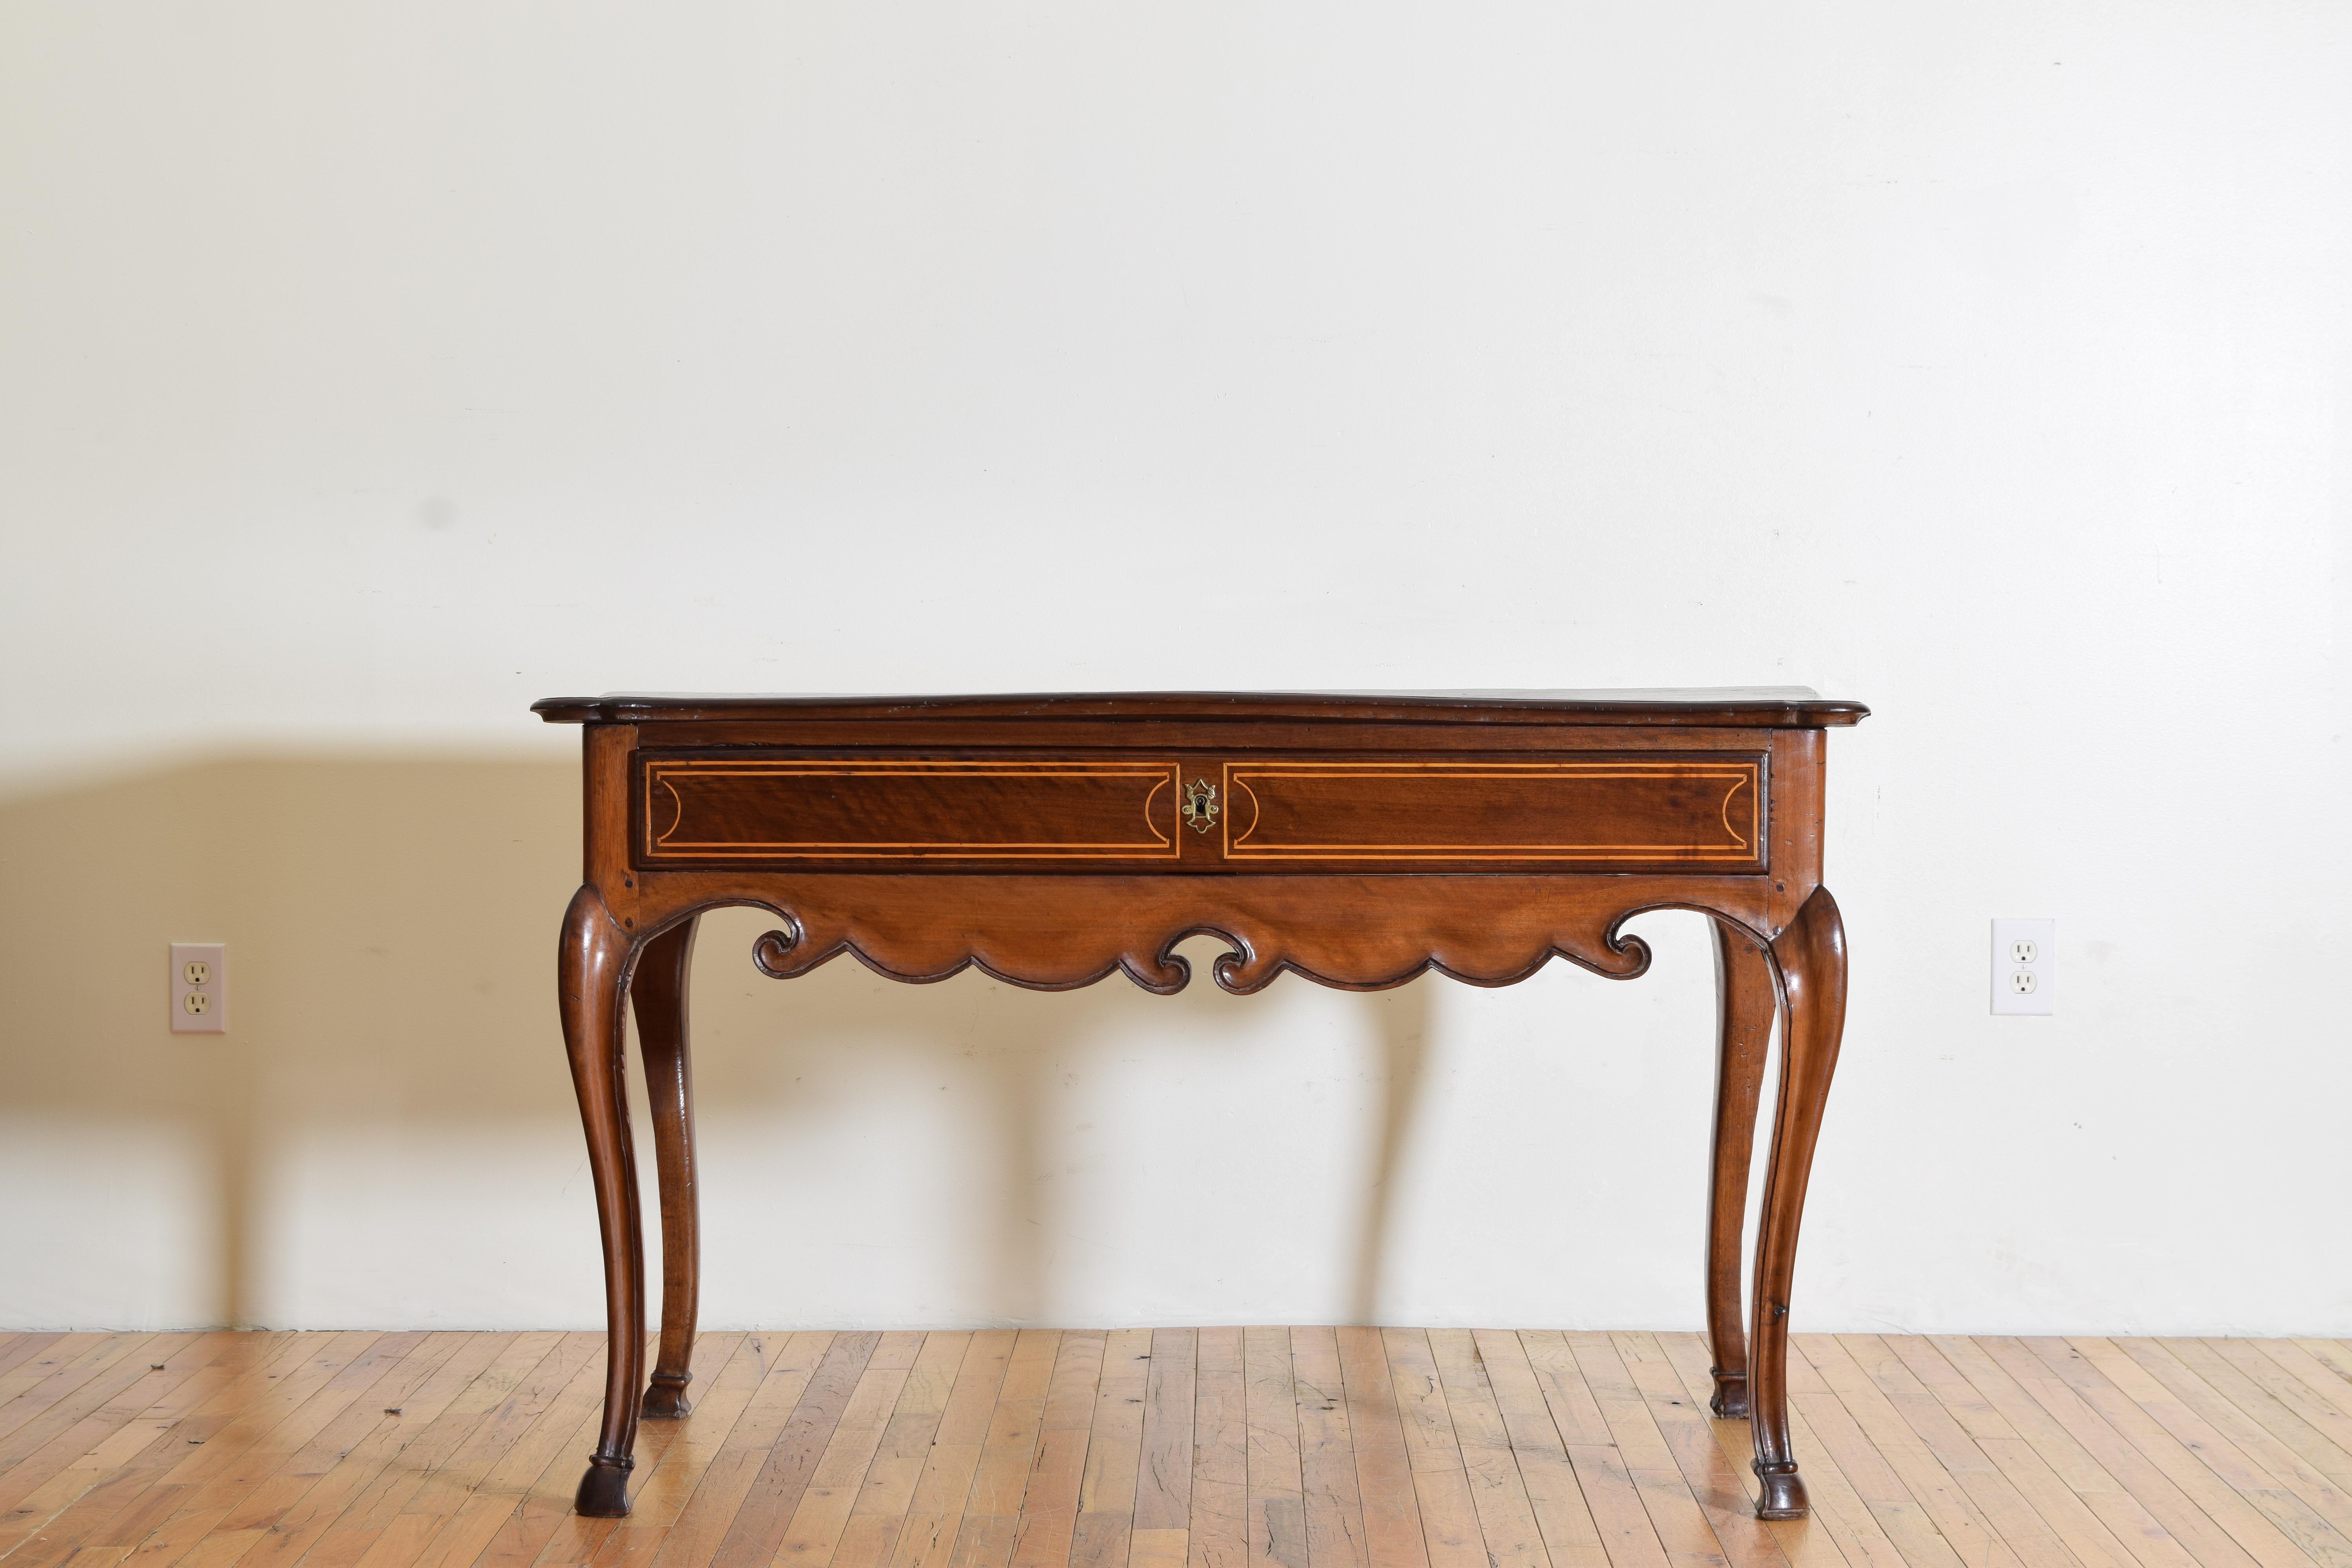 Mid-18th Century Portuguese Rococo Period Carved Walnut & Inlaid 1-Drawer Console, mid 18th cen. For Sale